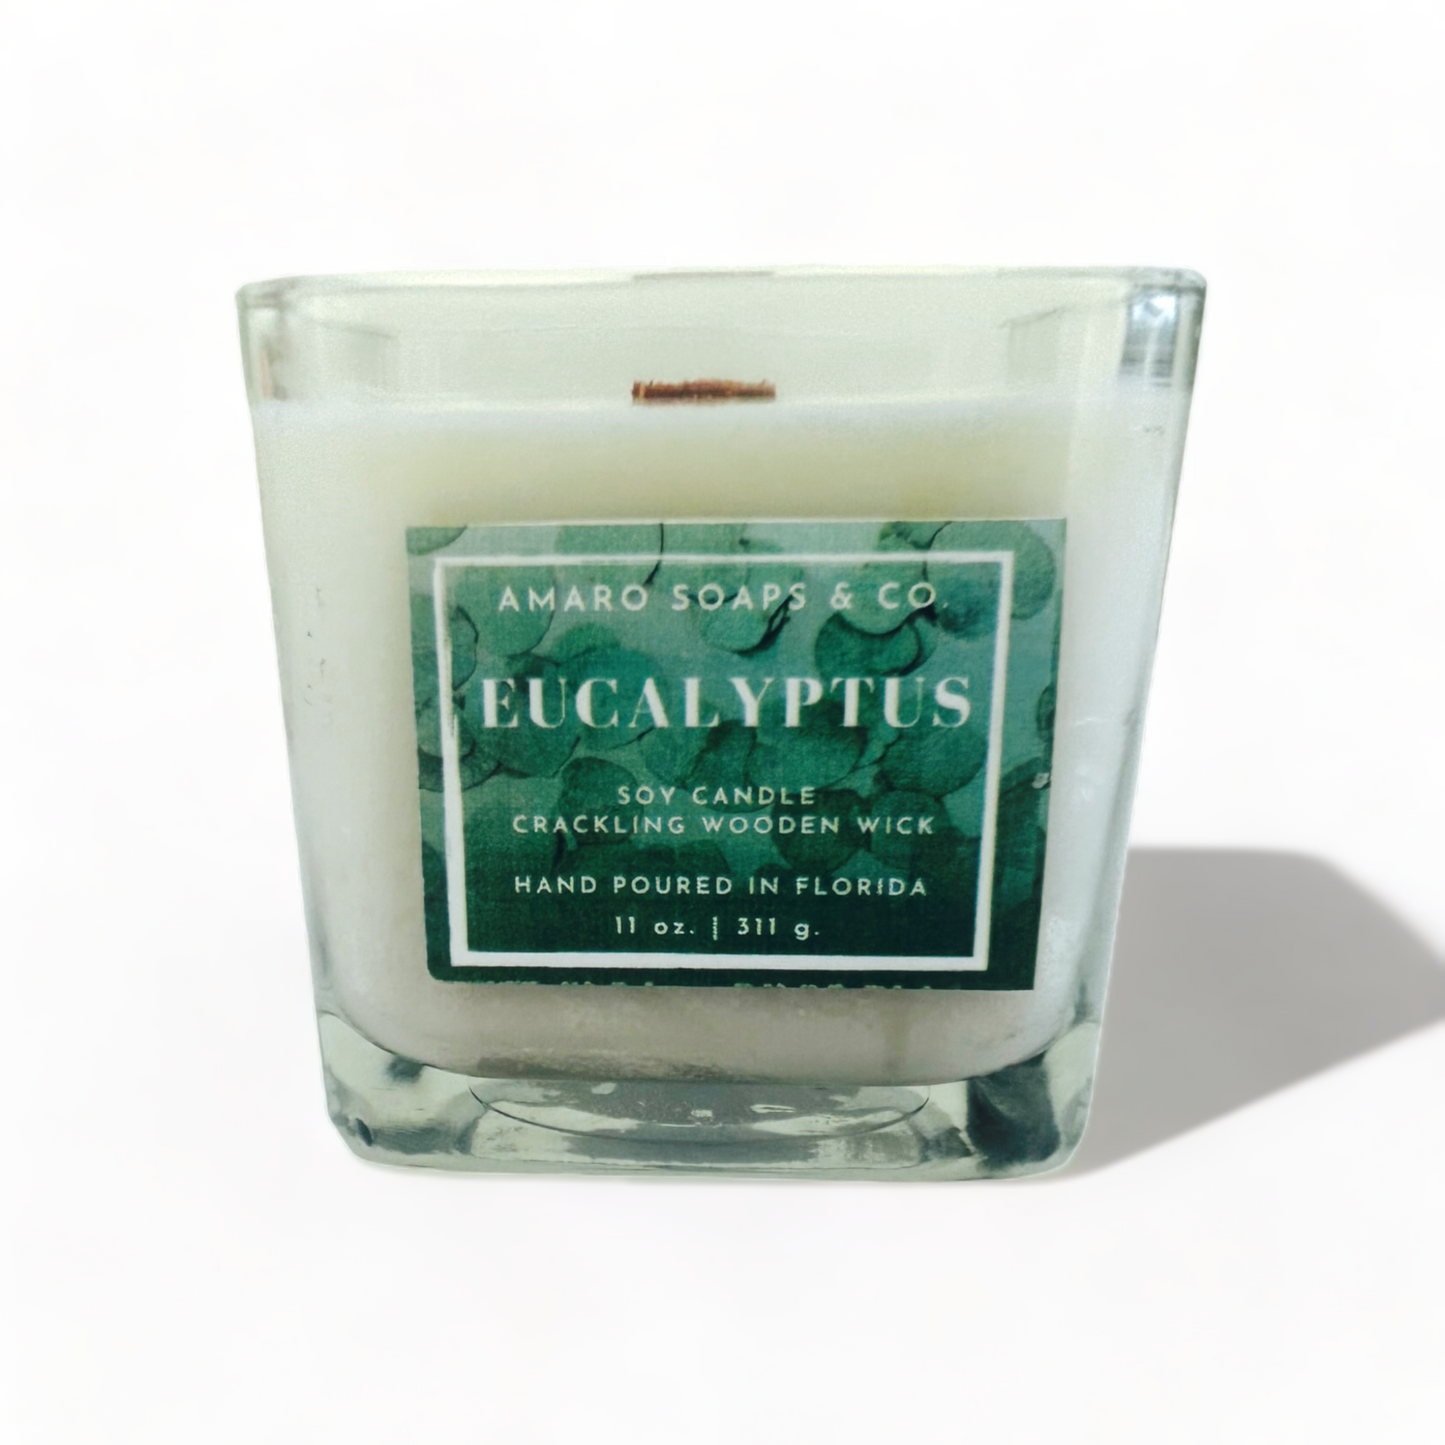 Eucalyptus Wooden Wick Soy Candle